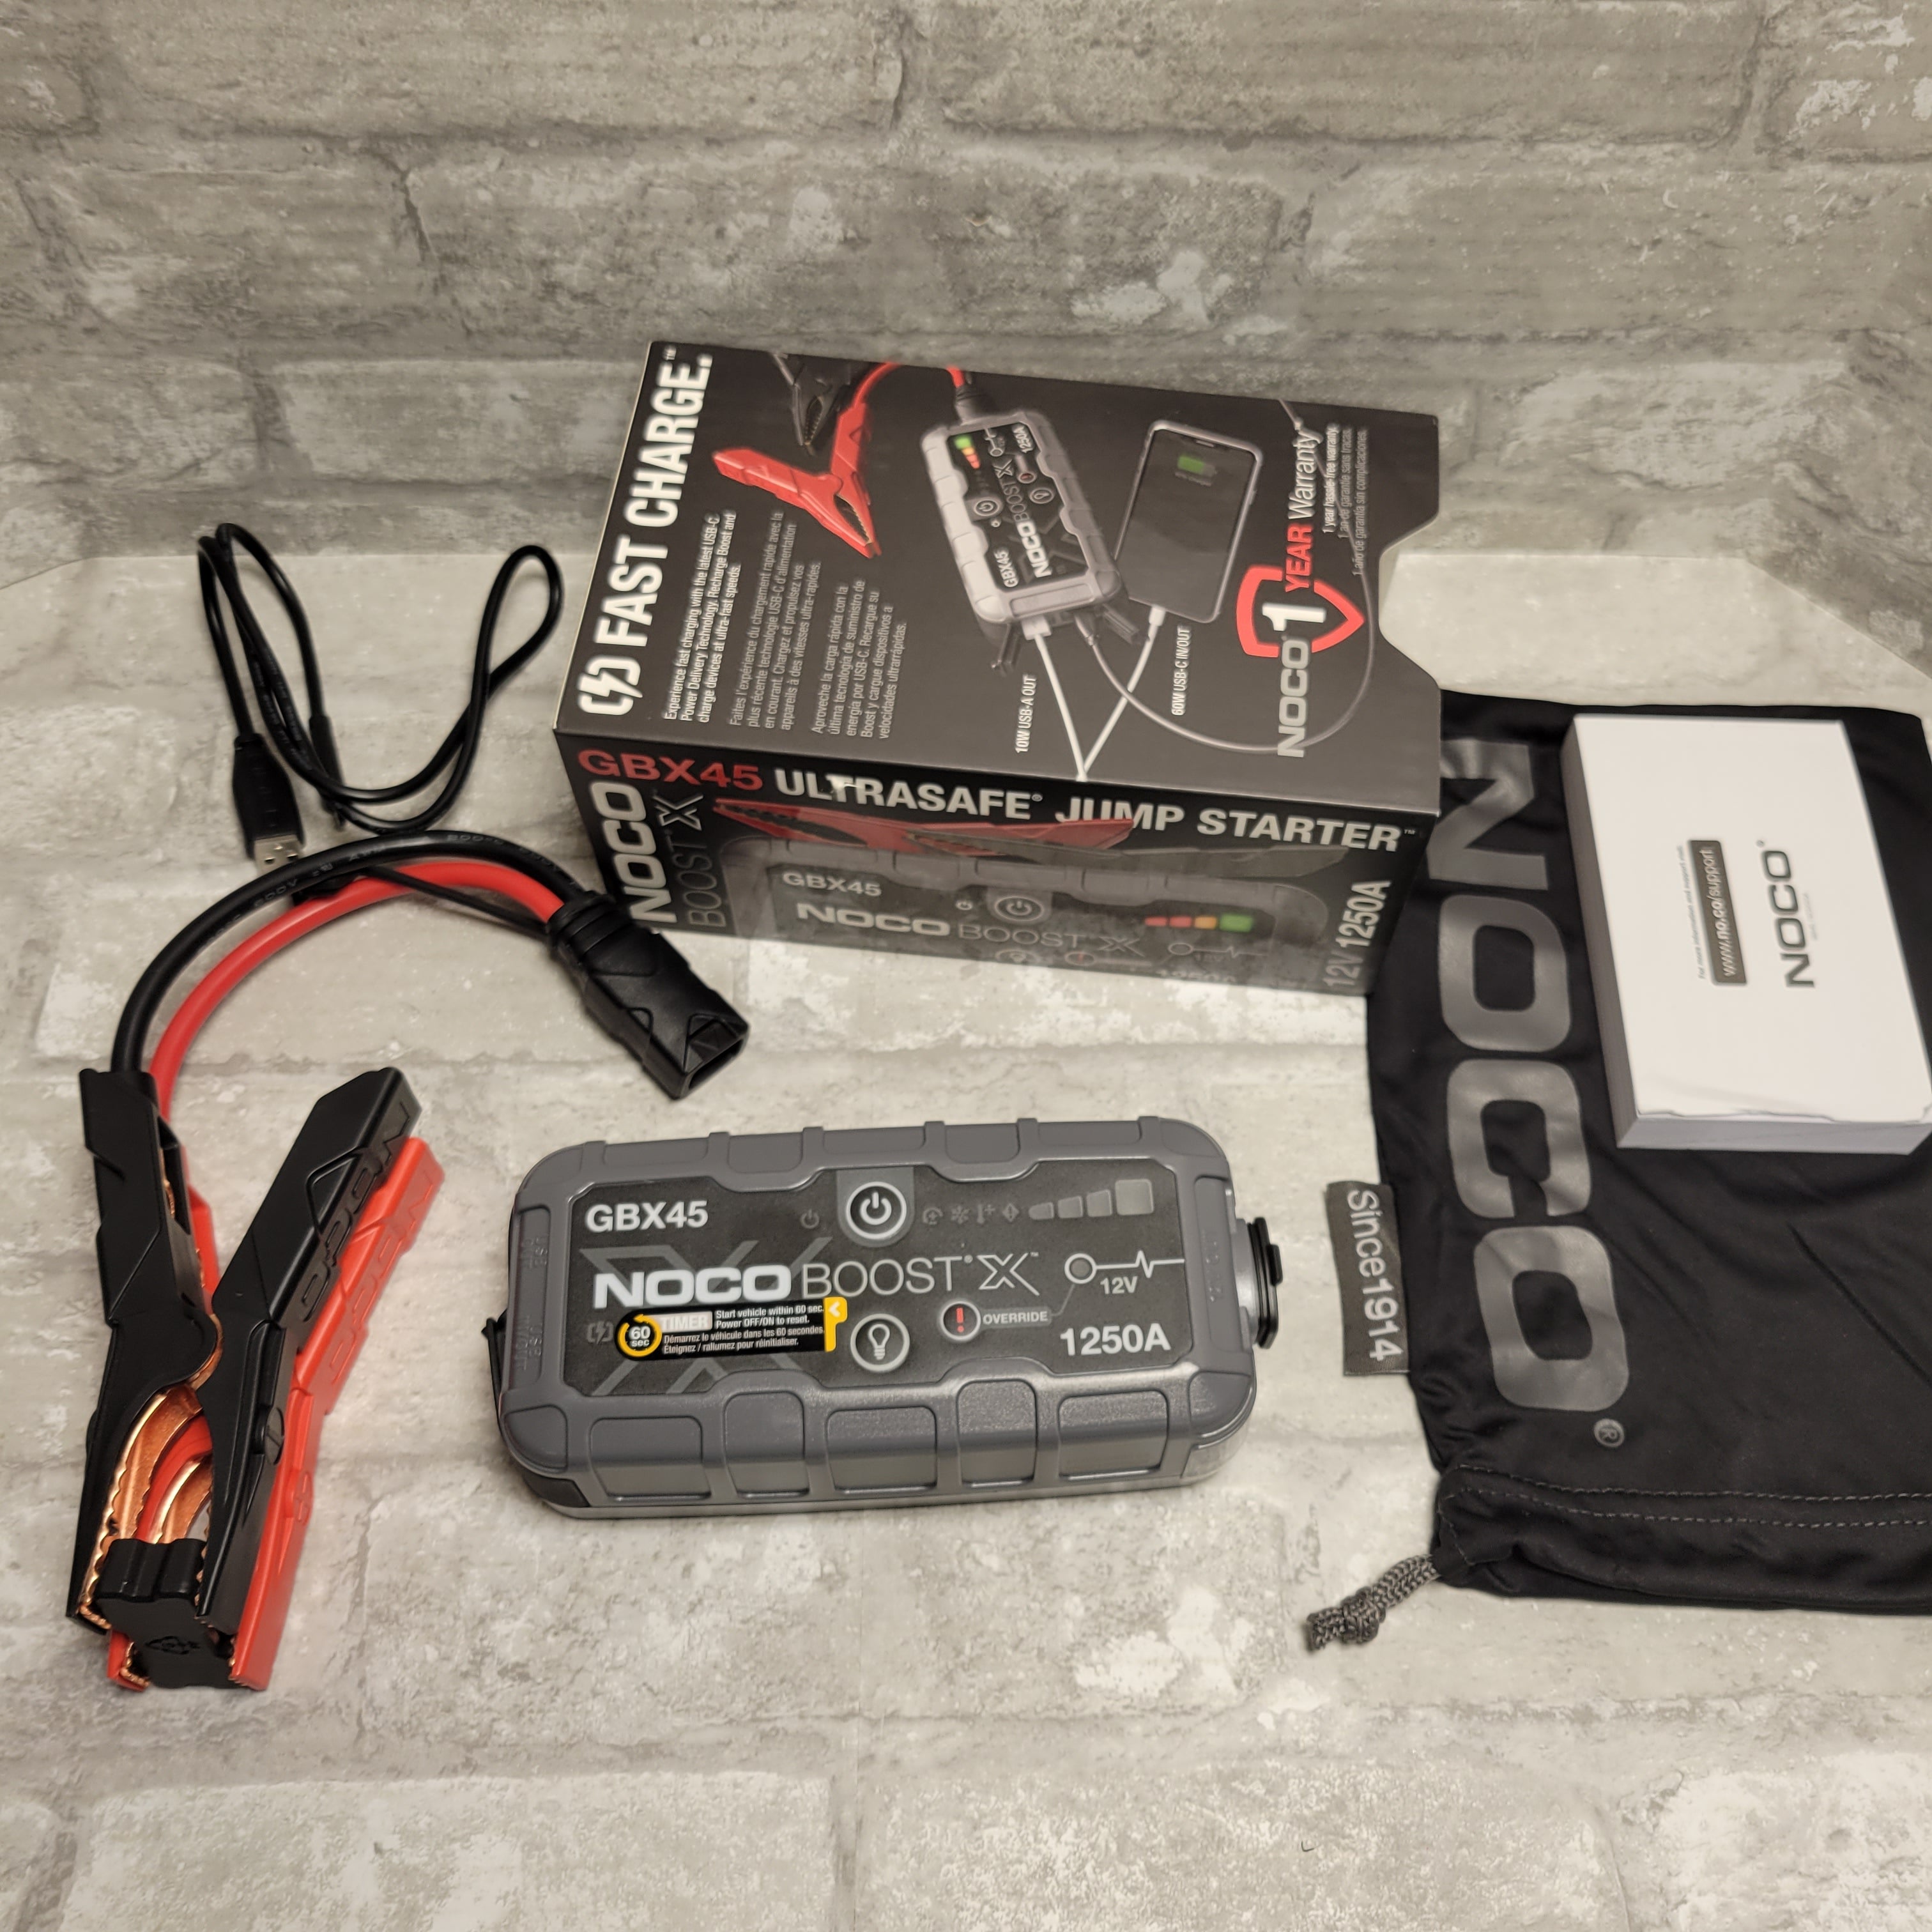 NOCO Boost X GBX45 1250A 12V UltraSafe Portable Lithium Jump Starter *FOR PARTS* (8046017085678)